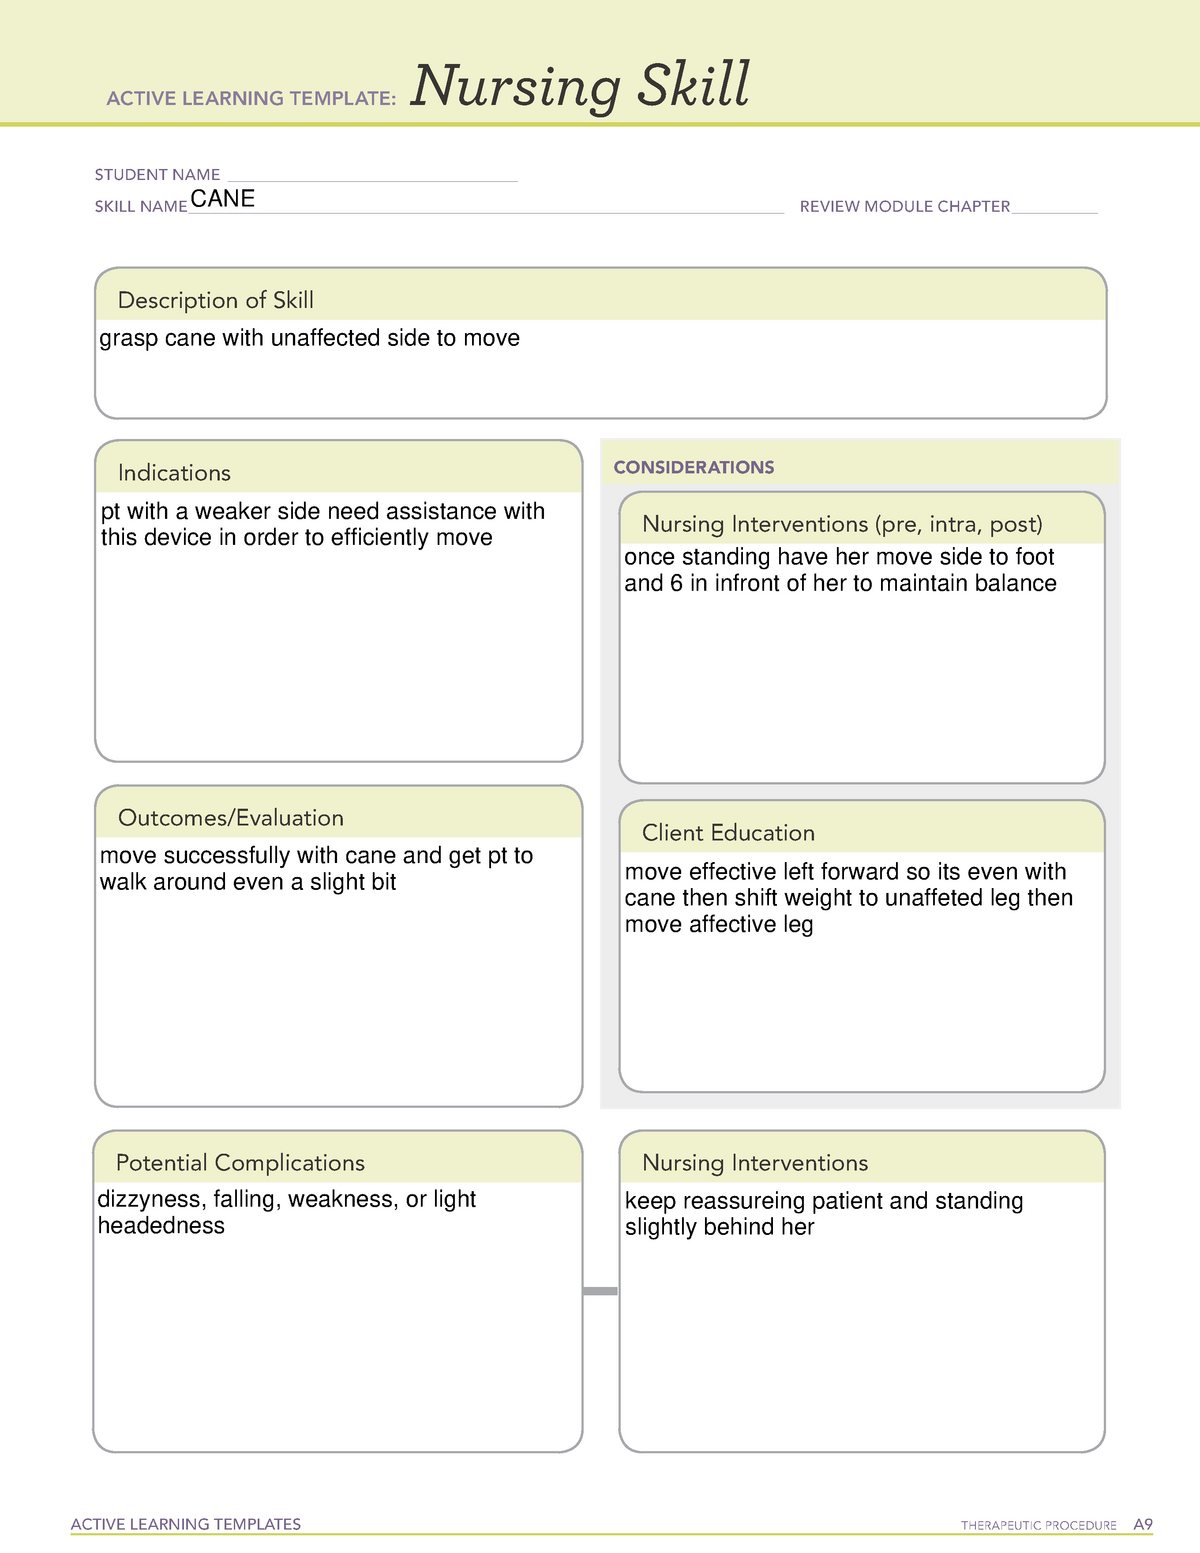 Active Learning Template Nursing Skill form (3)CANE ACTIVE LEARNING